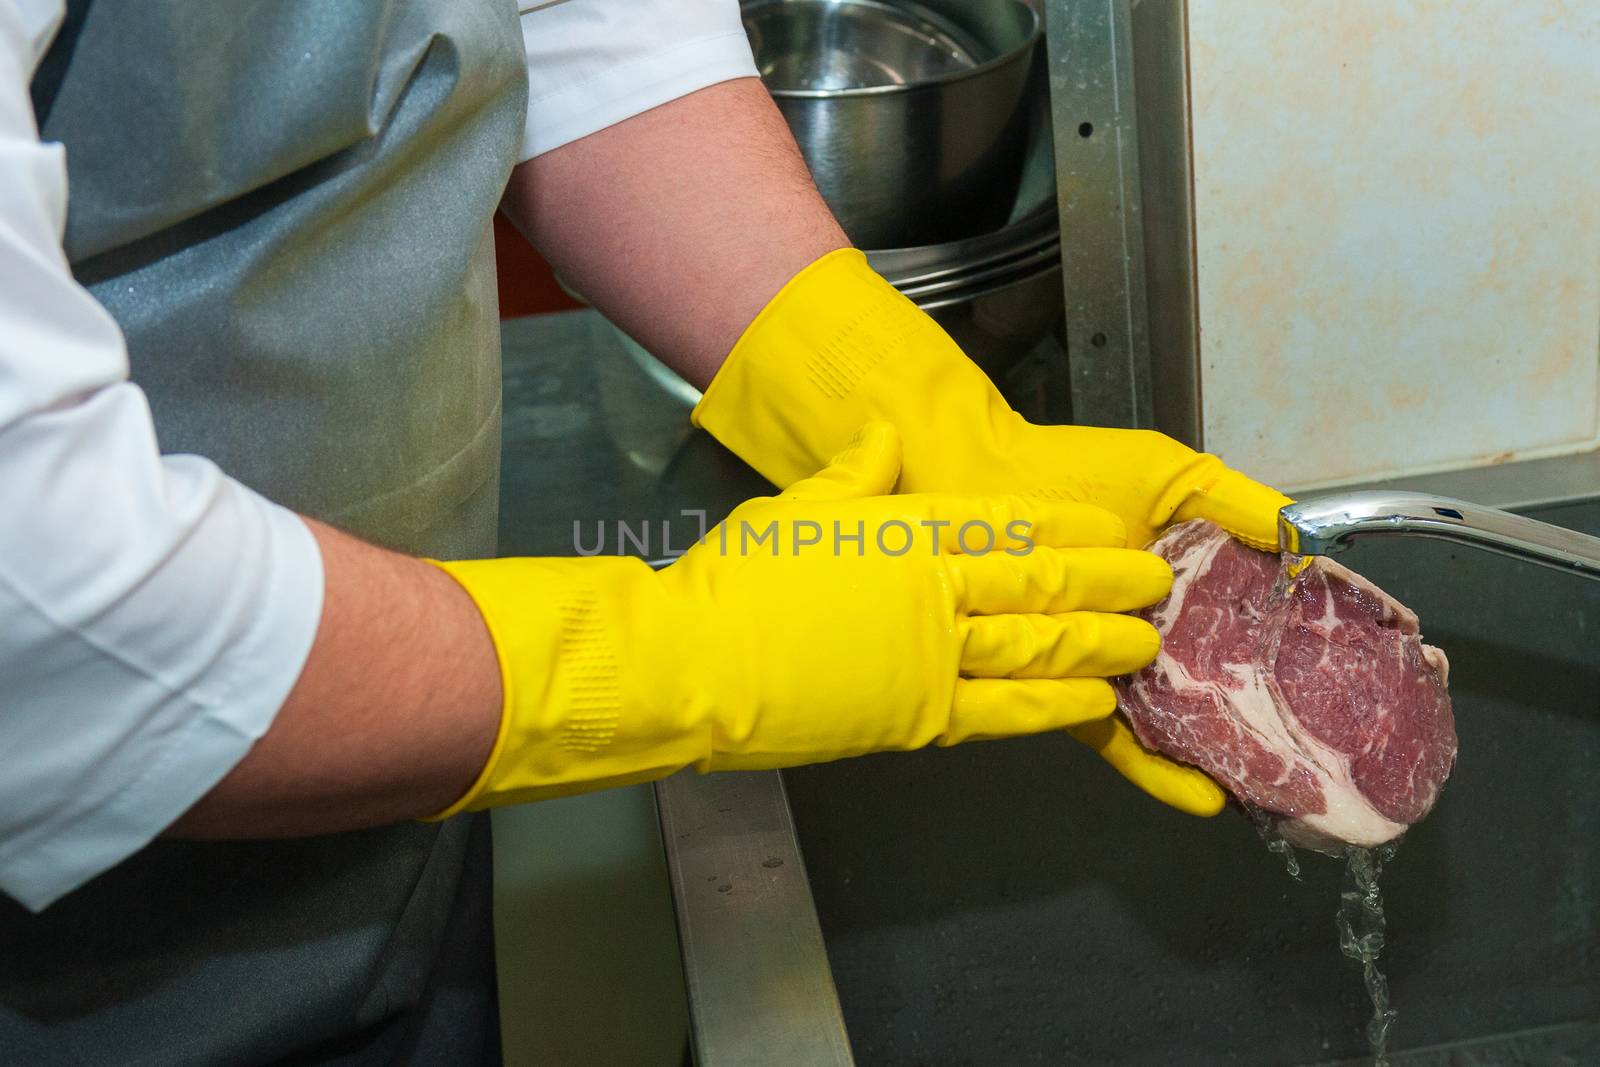 Hands in gloves washing and cleaning meat at the kitchen sink